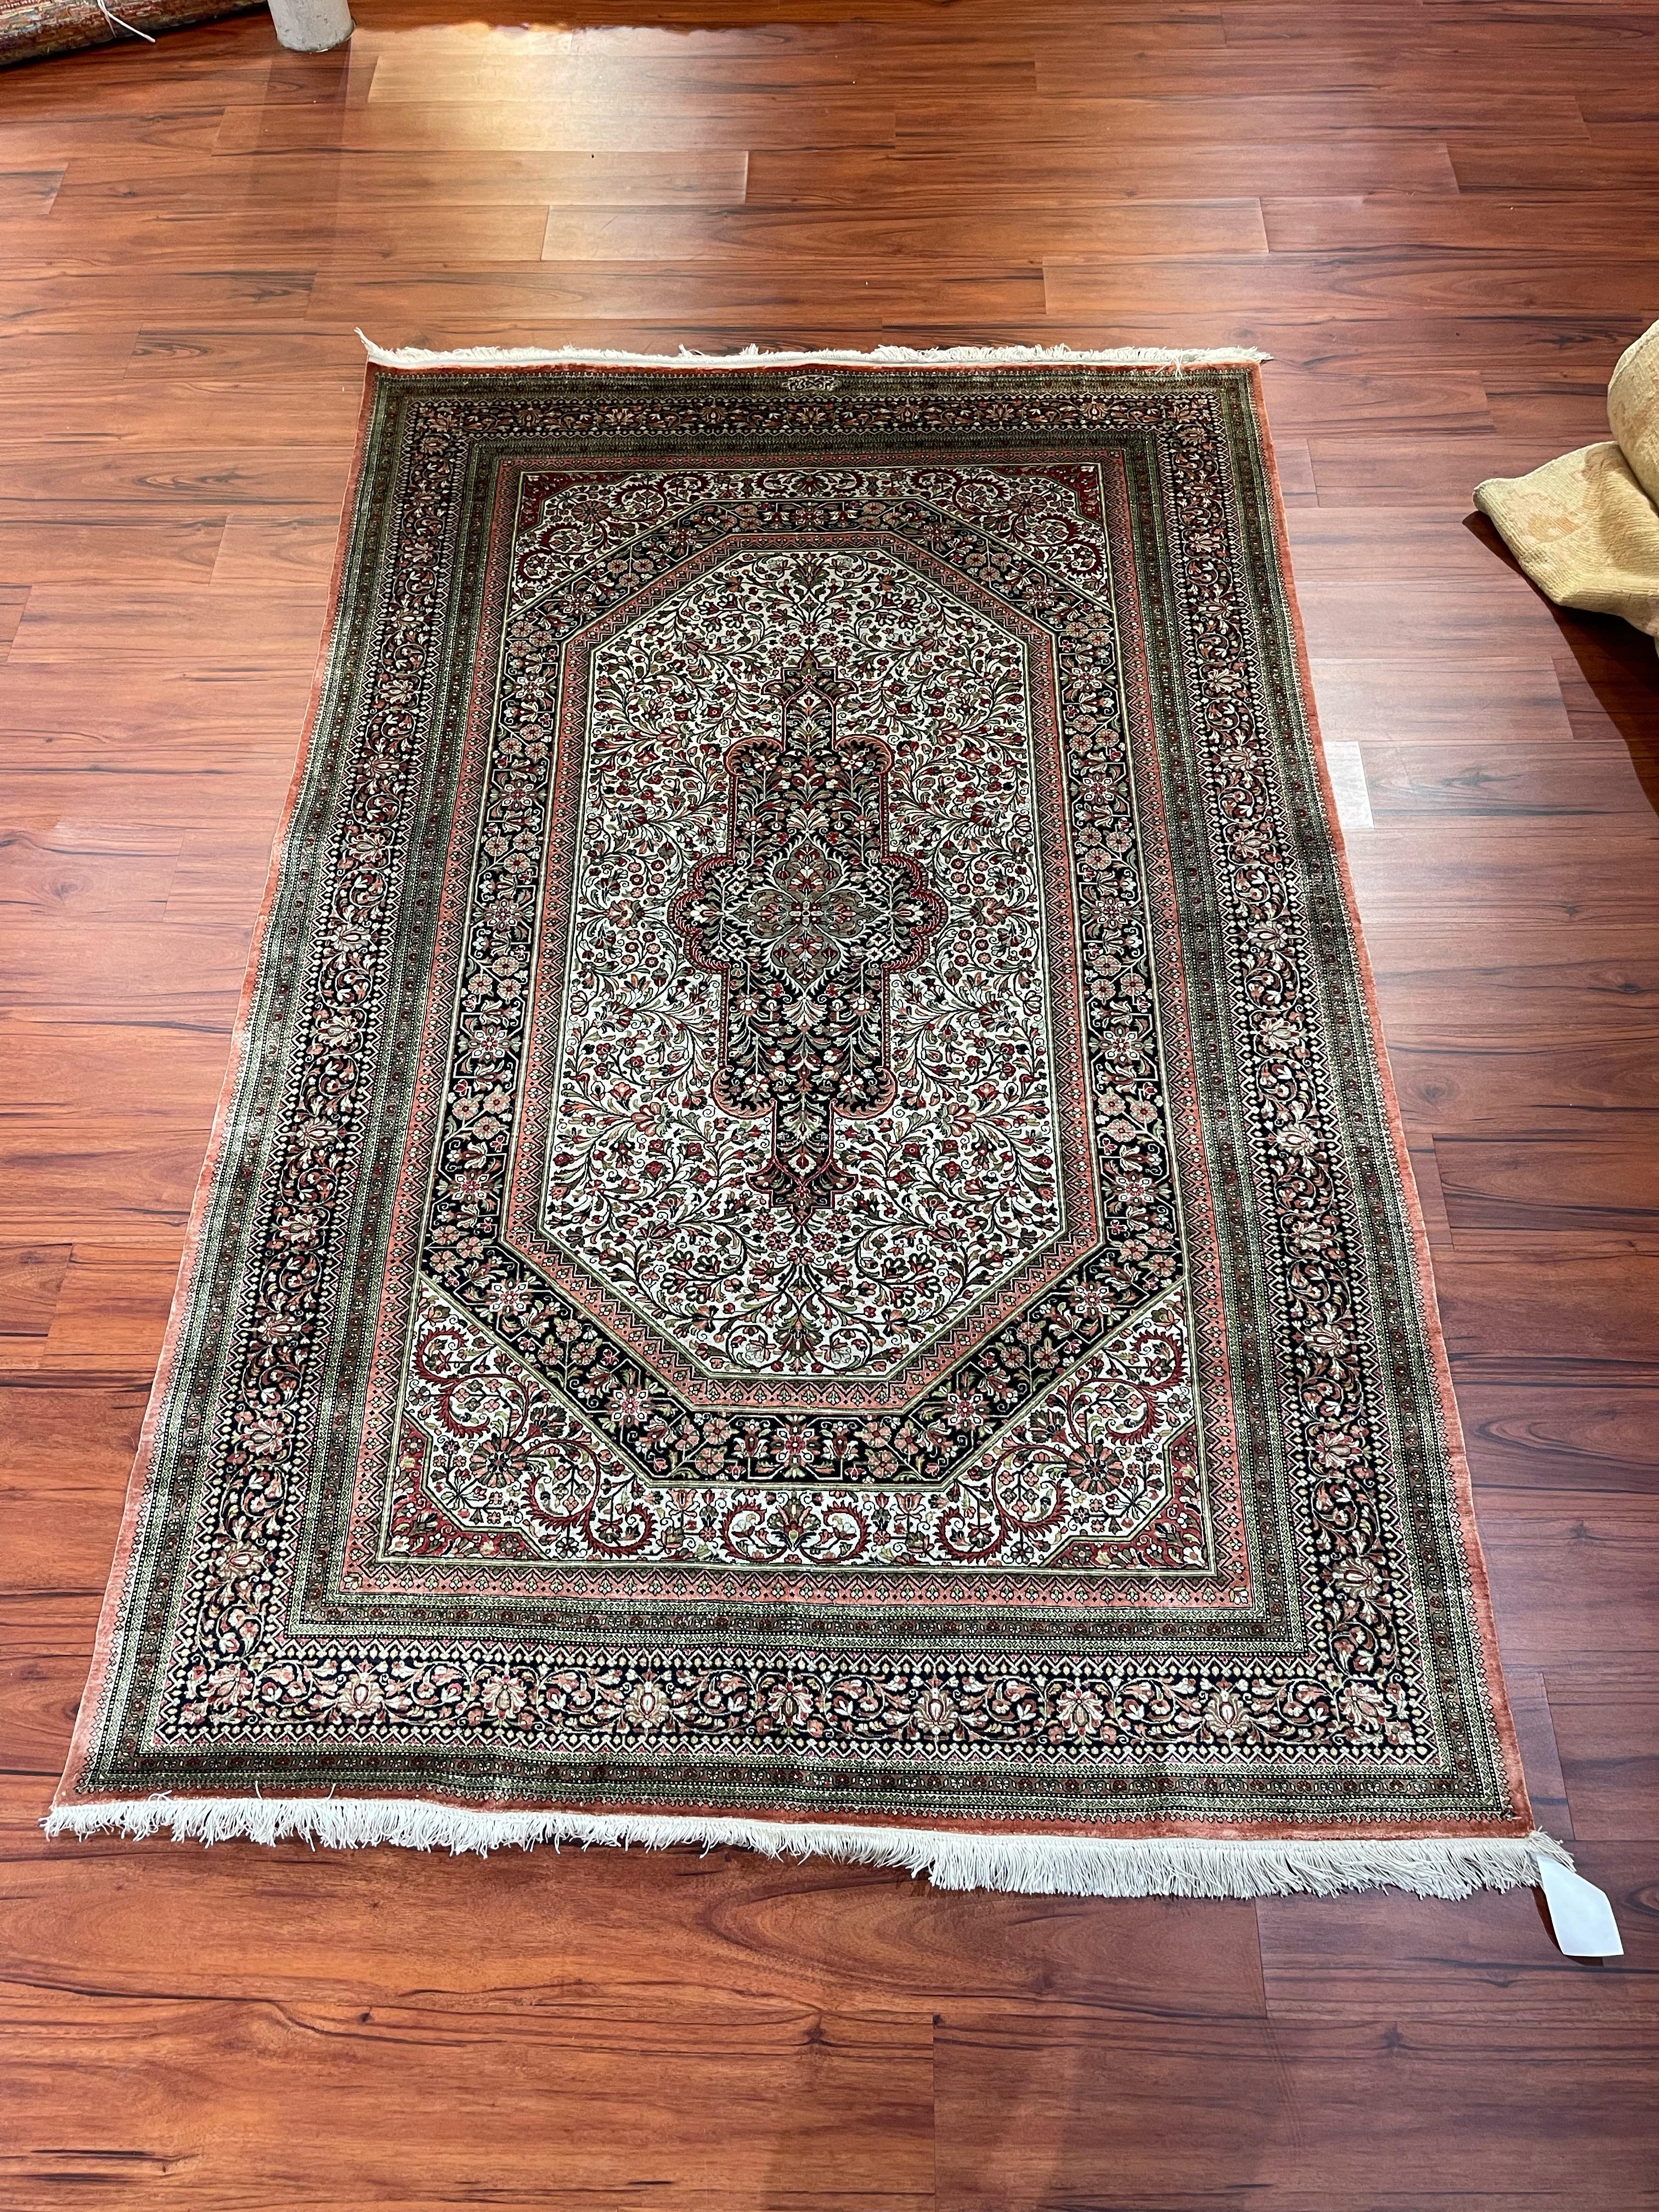 A stunning 100% Persian Silk Qum rug that orignated from Iran in the late 20th Century. This piece is Hand-knotted and in excellent condition.